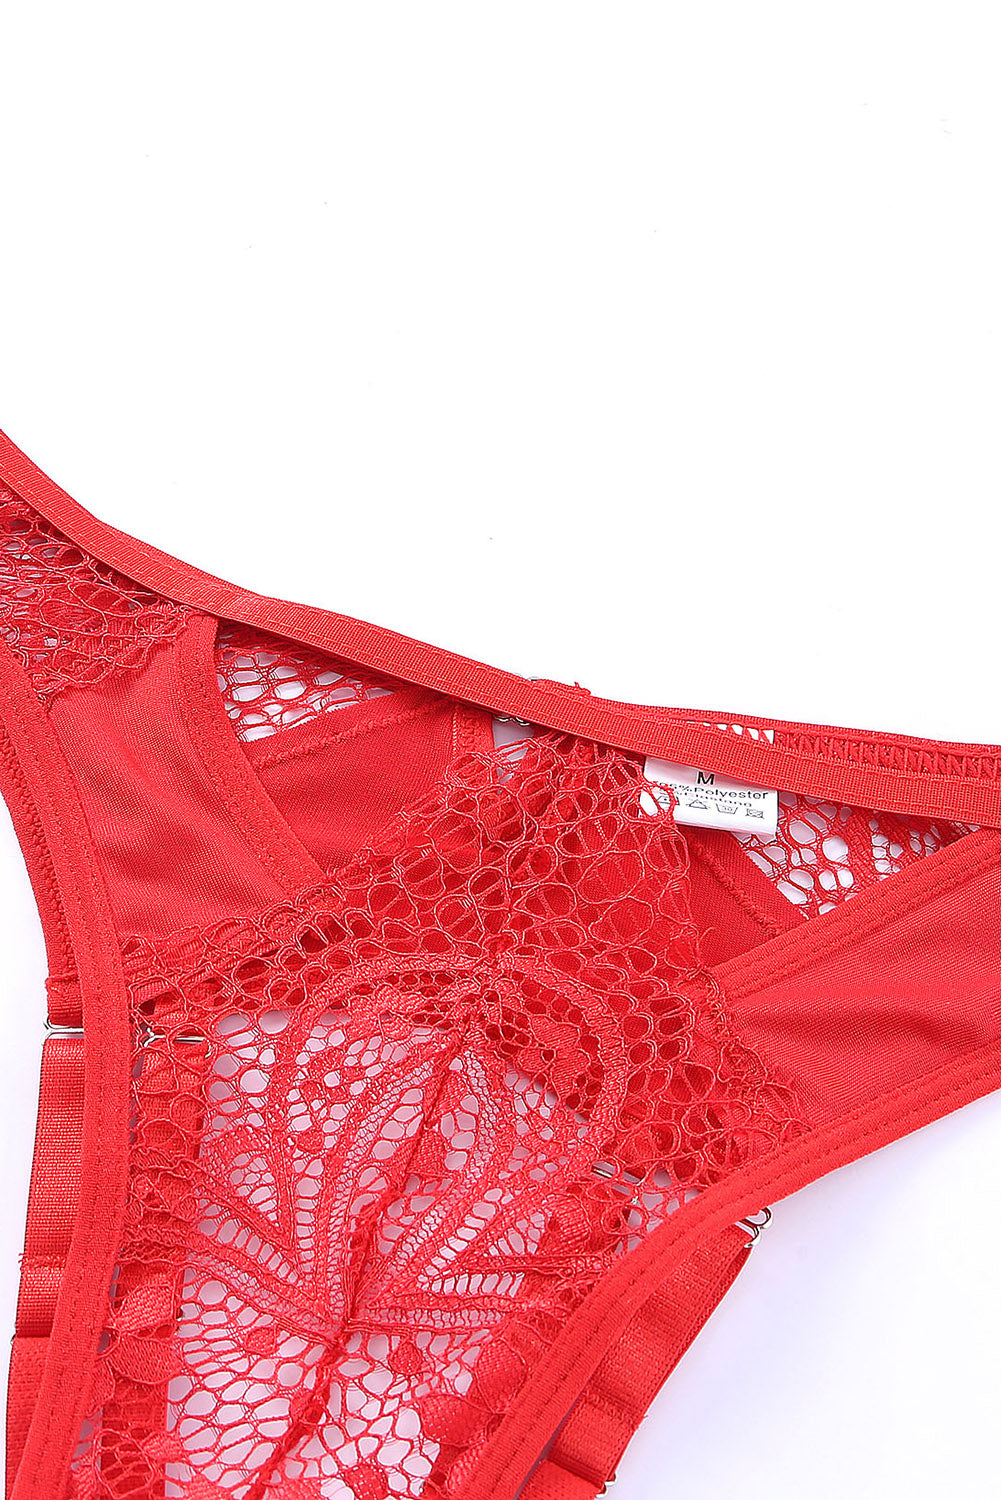 Cali Chic Women's Lingerie Celebrity Red Adjustable Straps Hollow-out Lace Panty